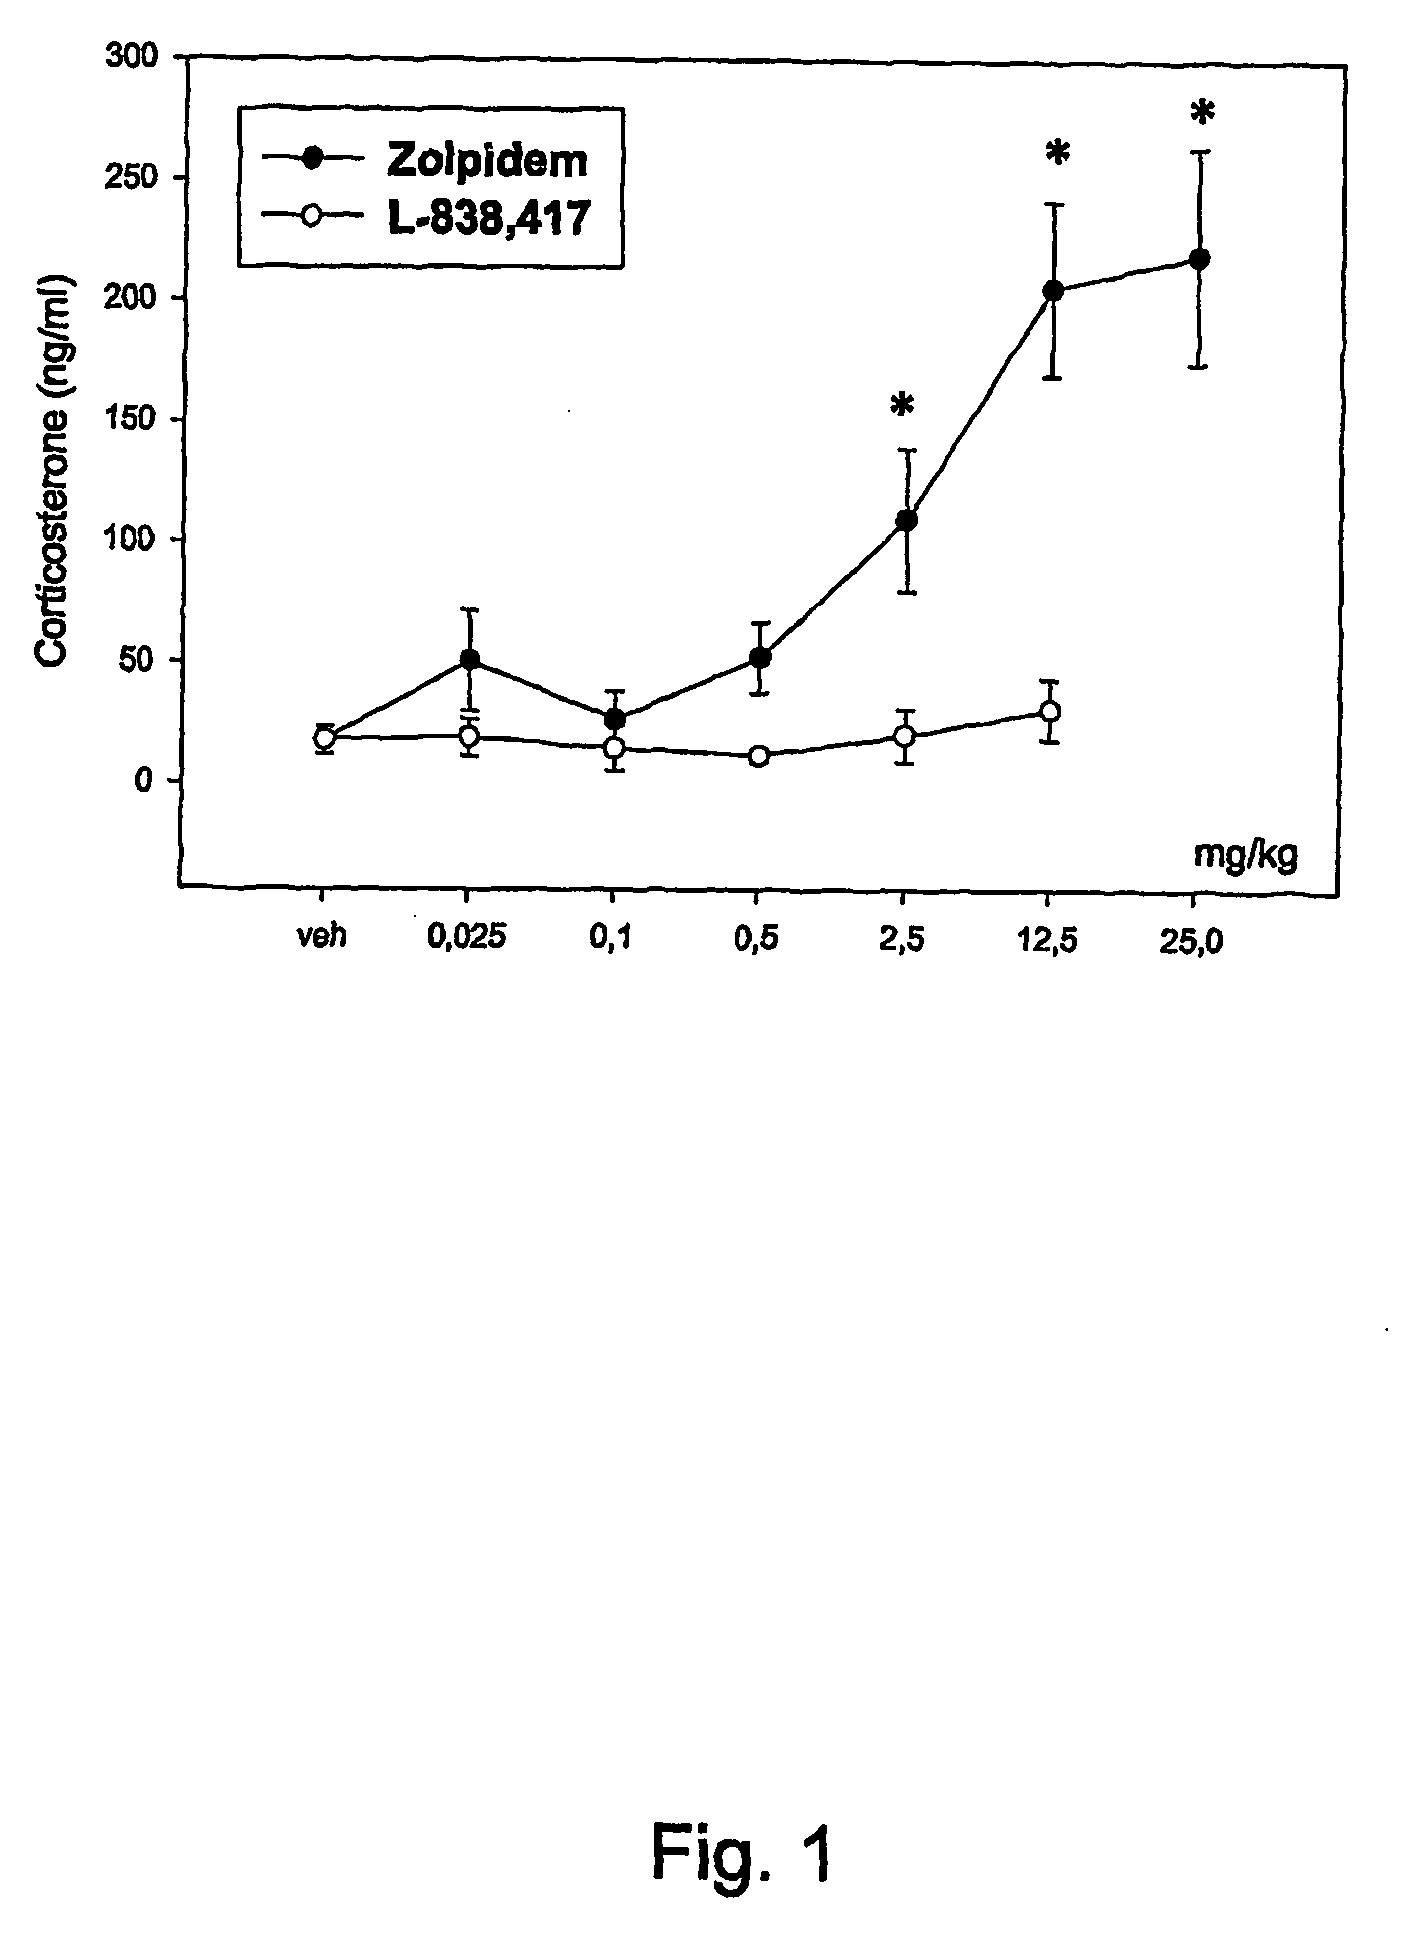 Method for screening for compounds as potential sedatives or anxiolytics